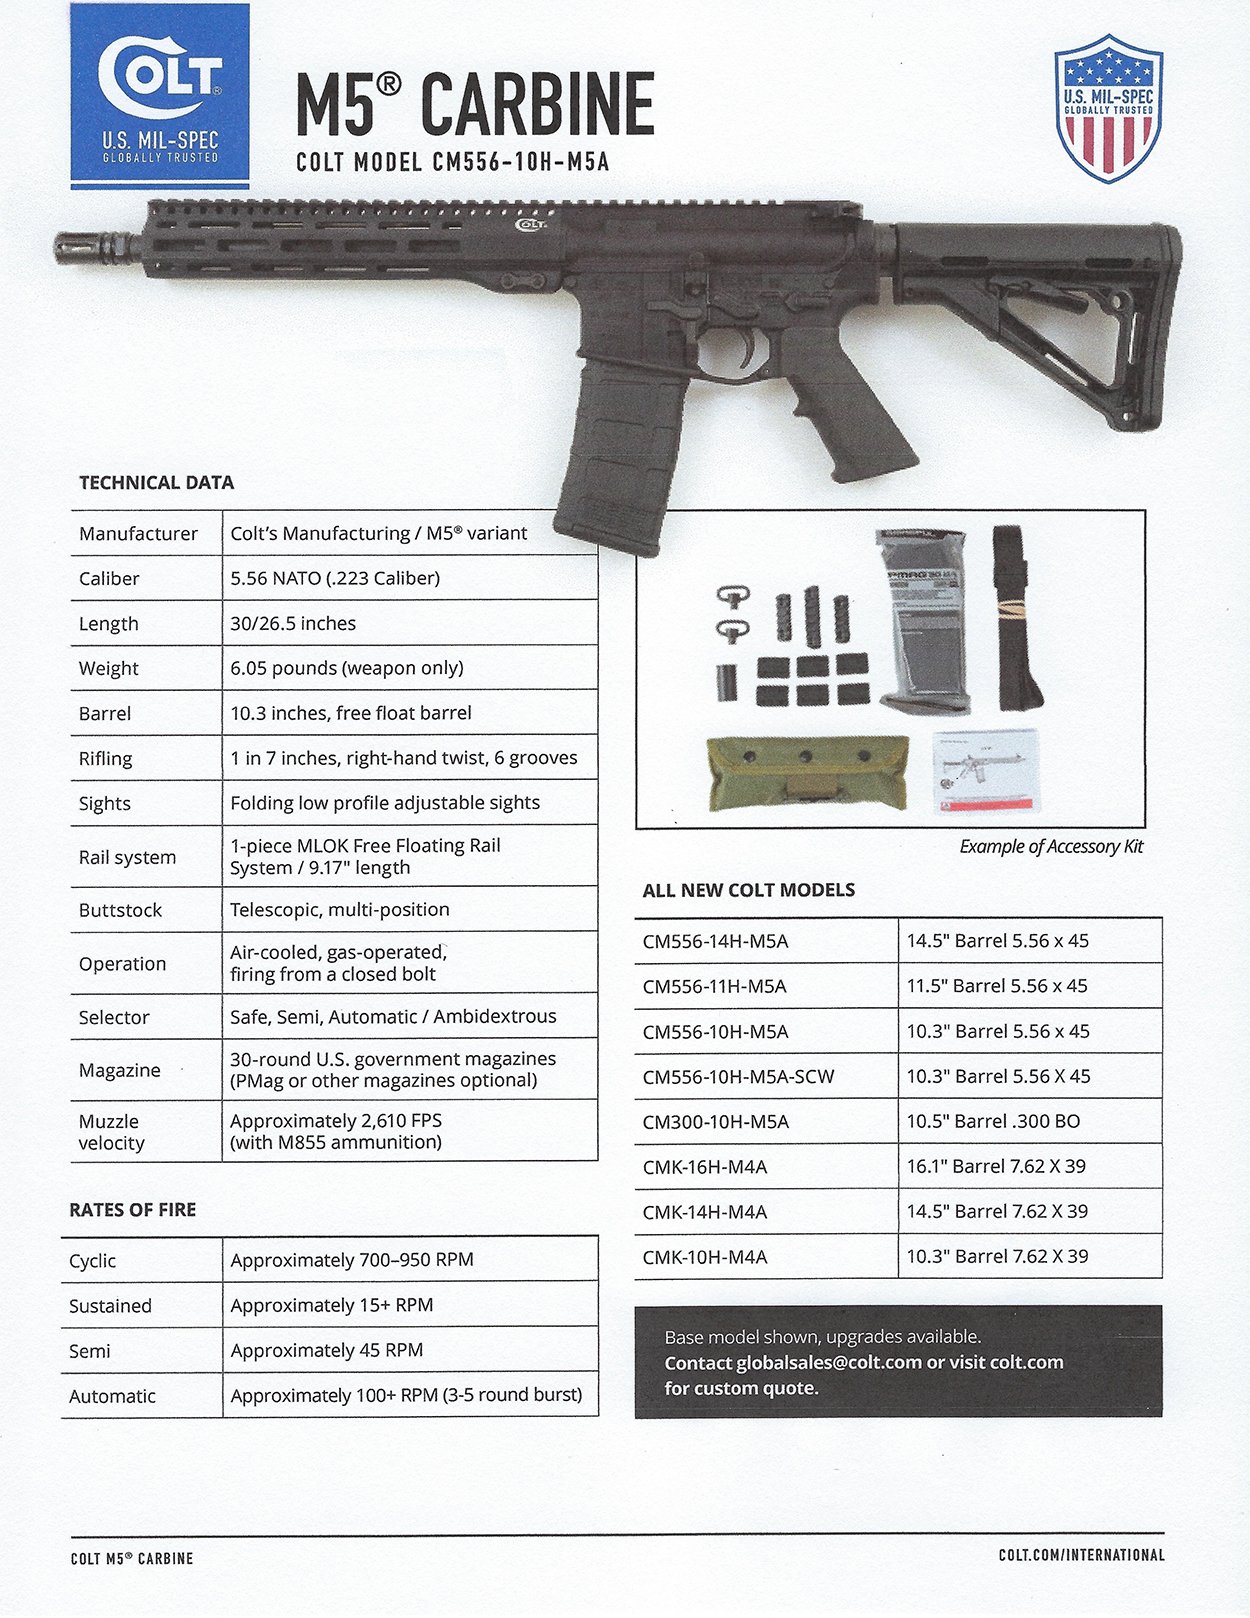 The Colt M5 Carbine's specification sheet.